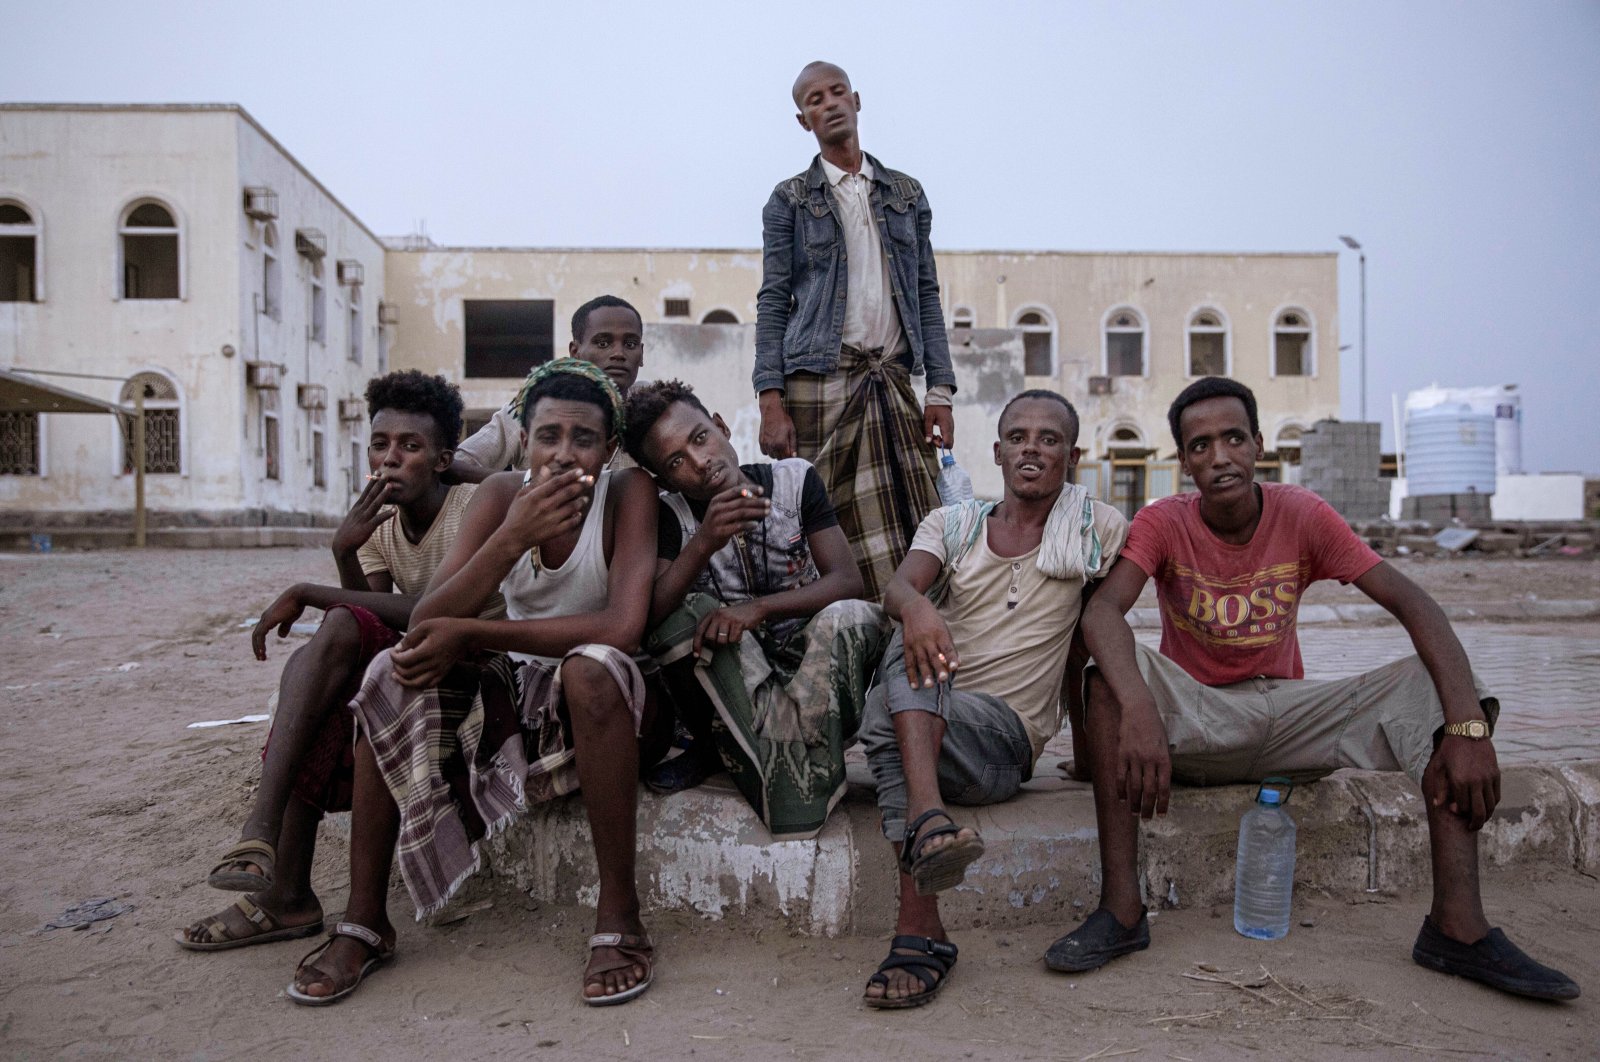 Ethiopian migrants sit together and smoke, as they take shelter in the "22nd May Football Stadium," destroyed by war, in Aden, Yemen, July 21, 2019. (AP Photo)